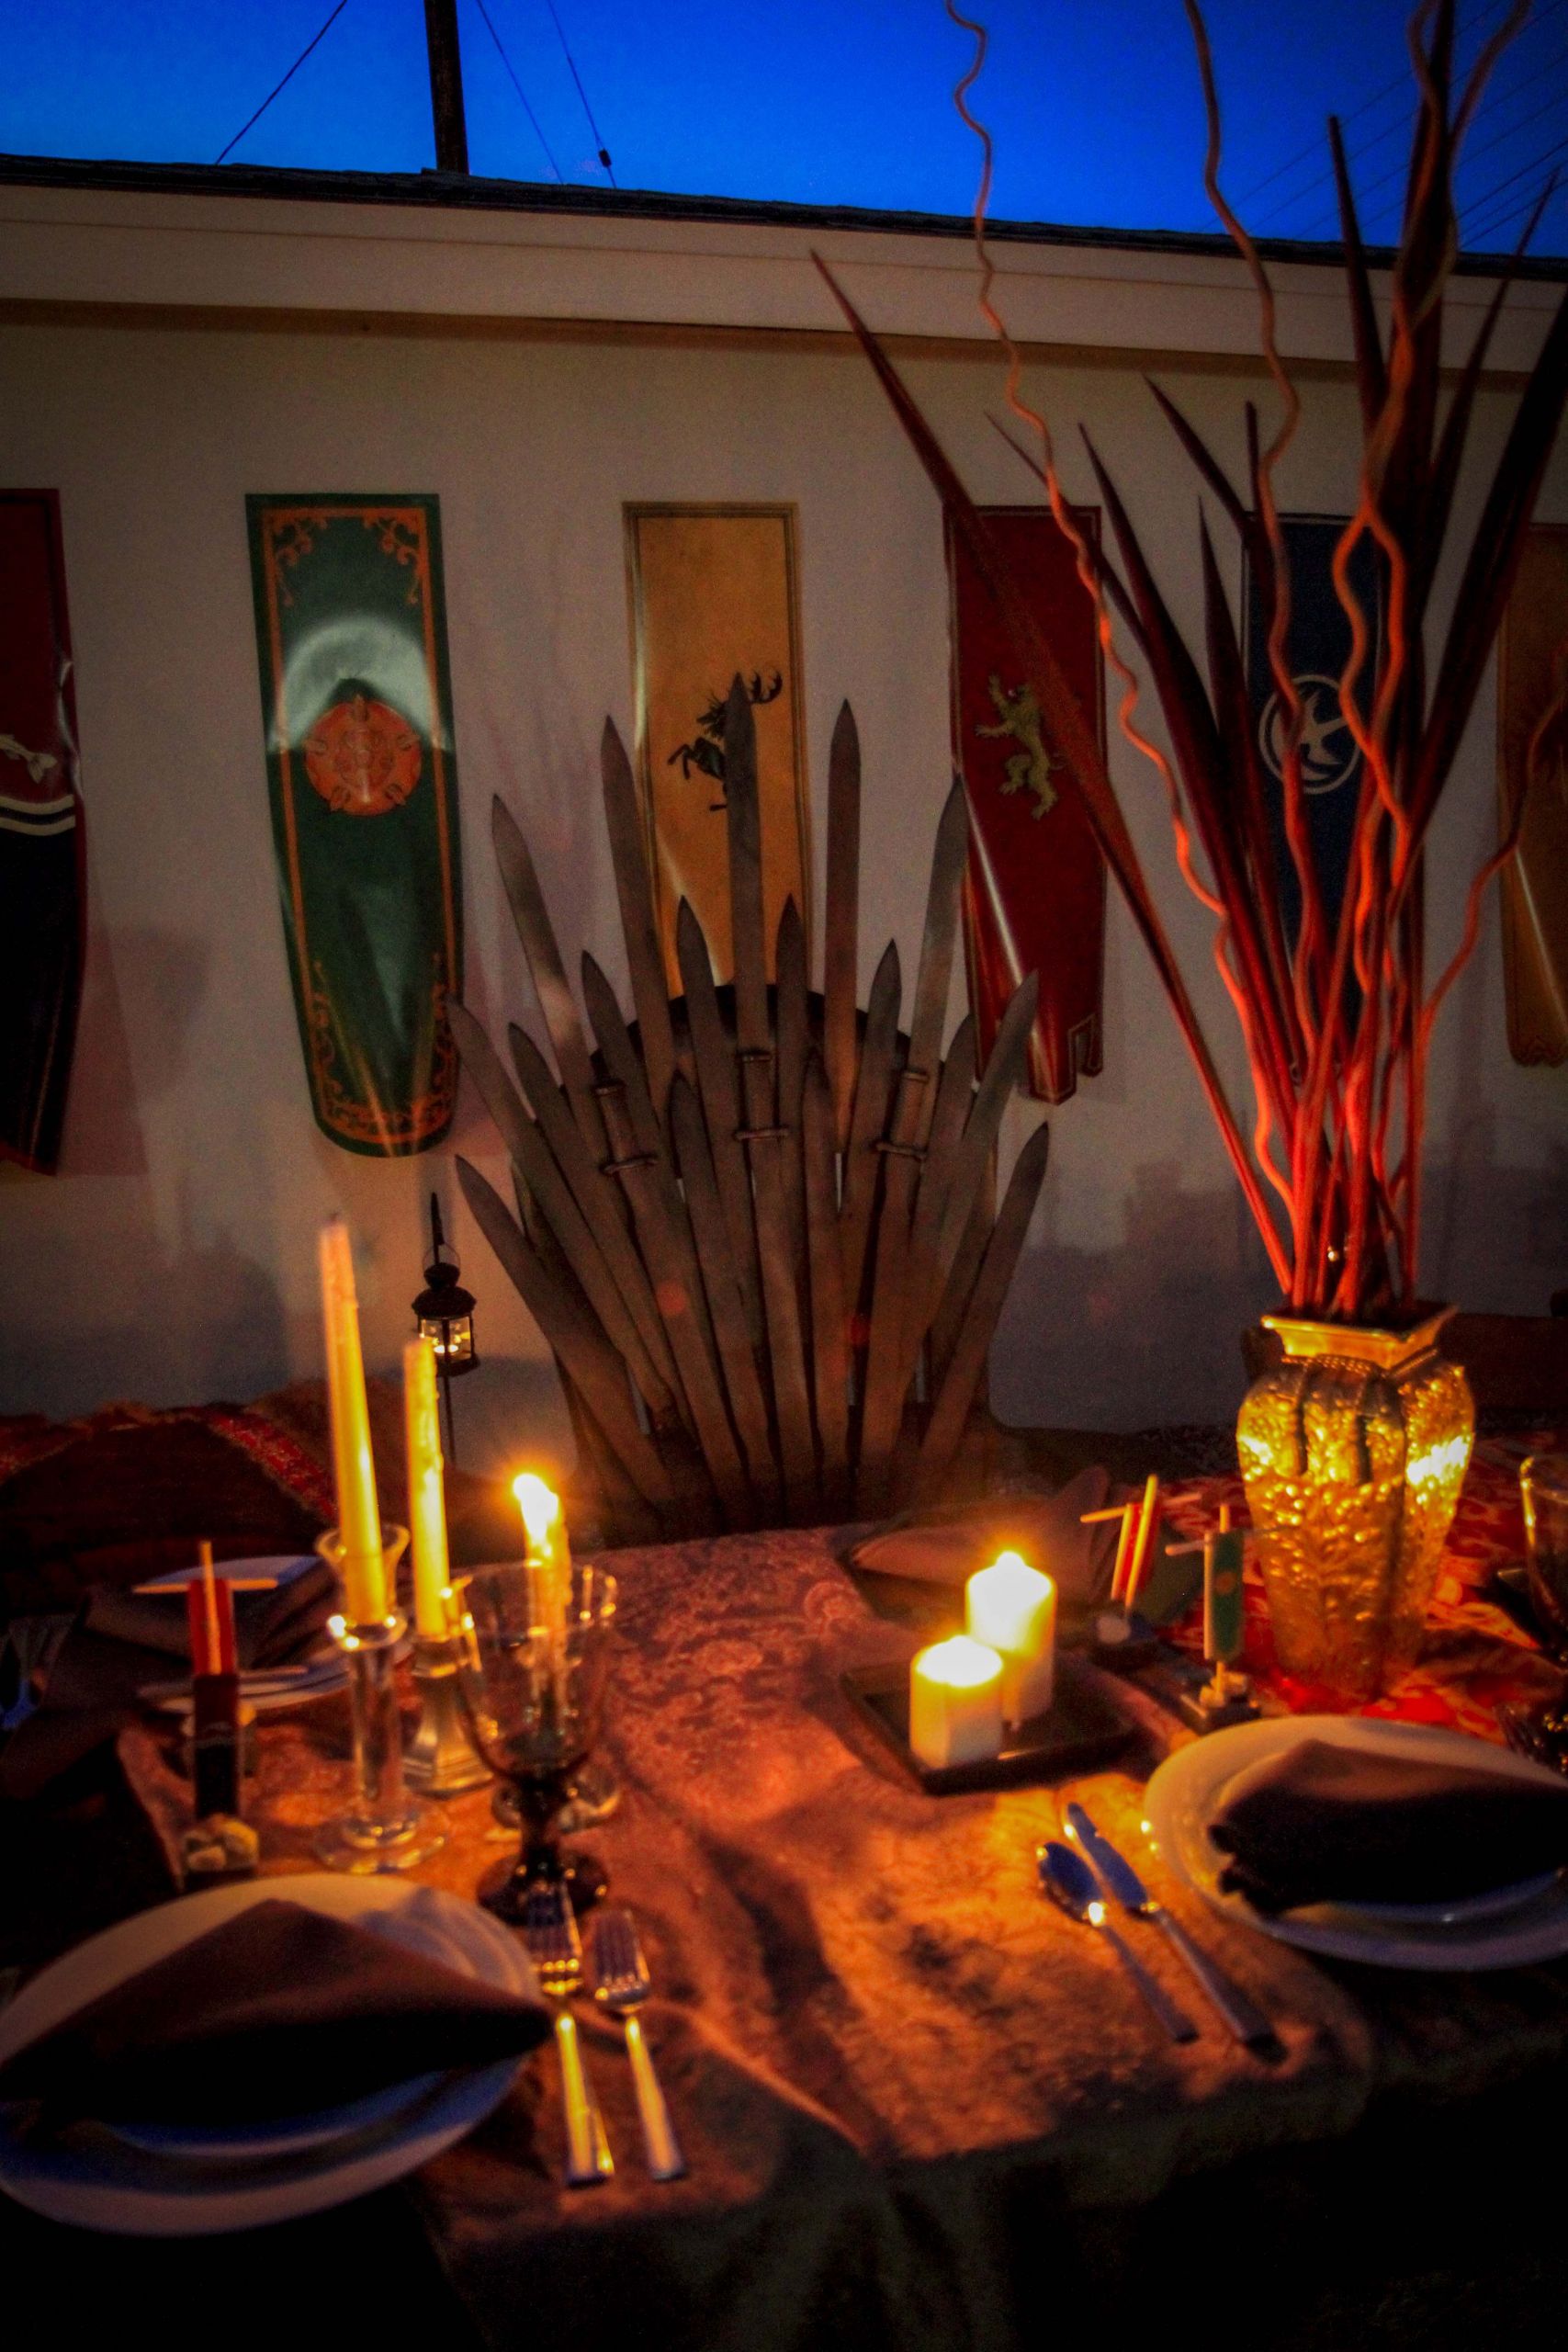 Game Of Thrones Dinner Party Ideas
 Epic Iron Throne in Kings Landing at night beautiful